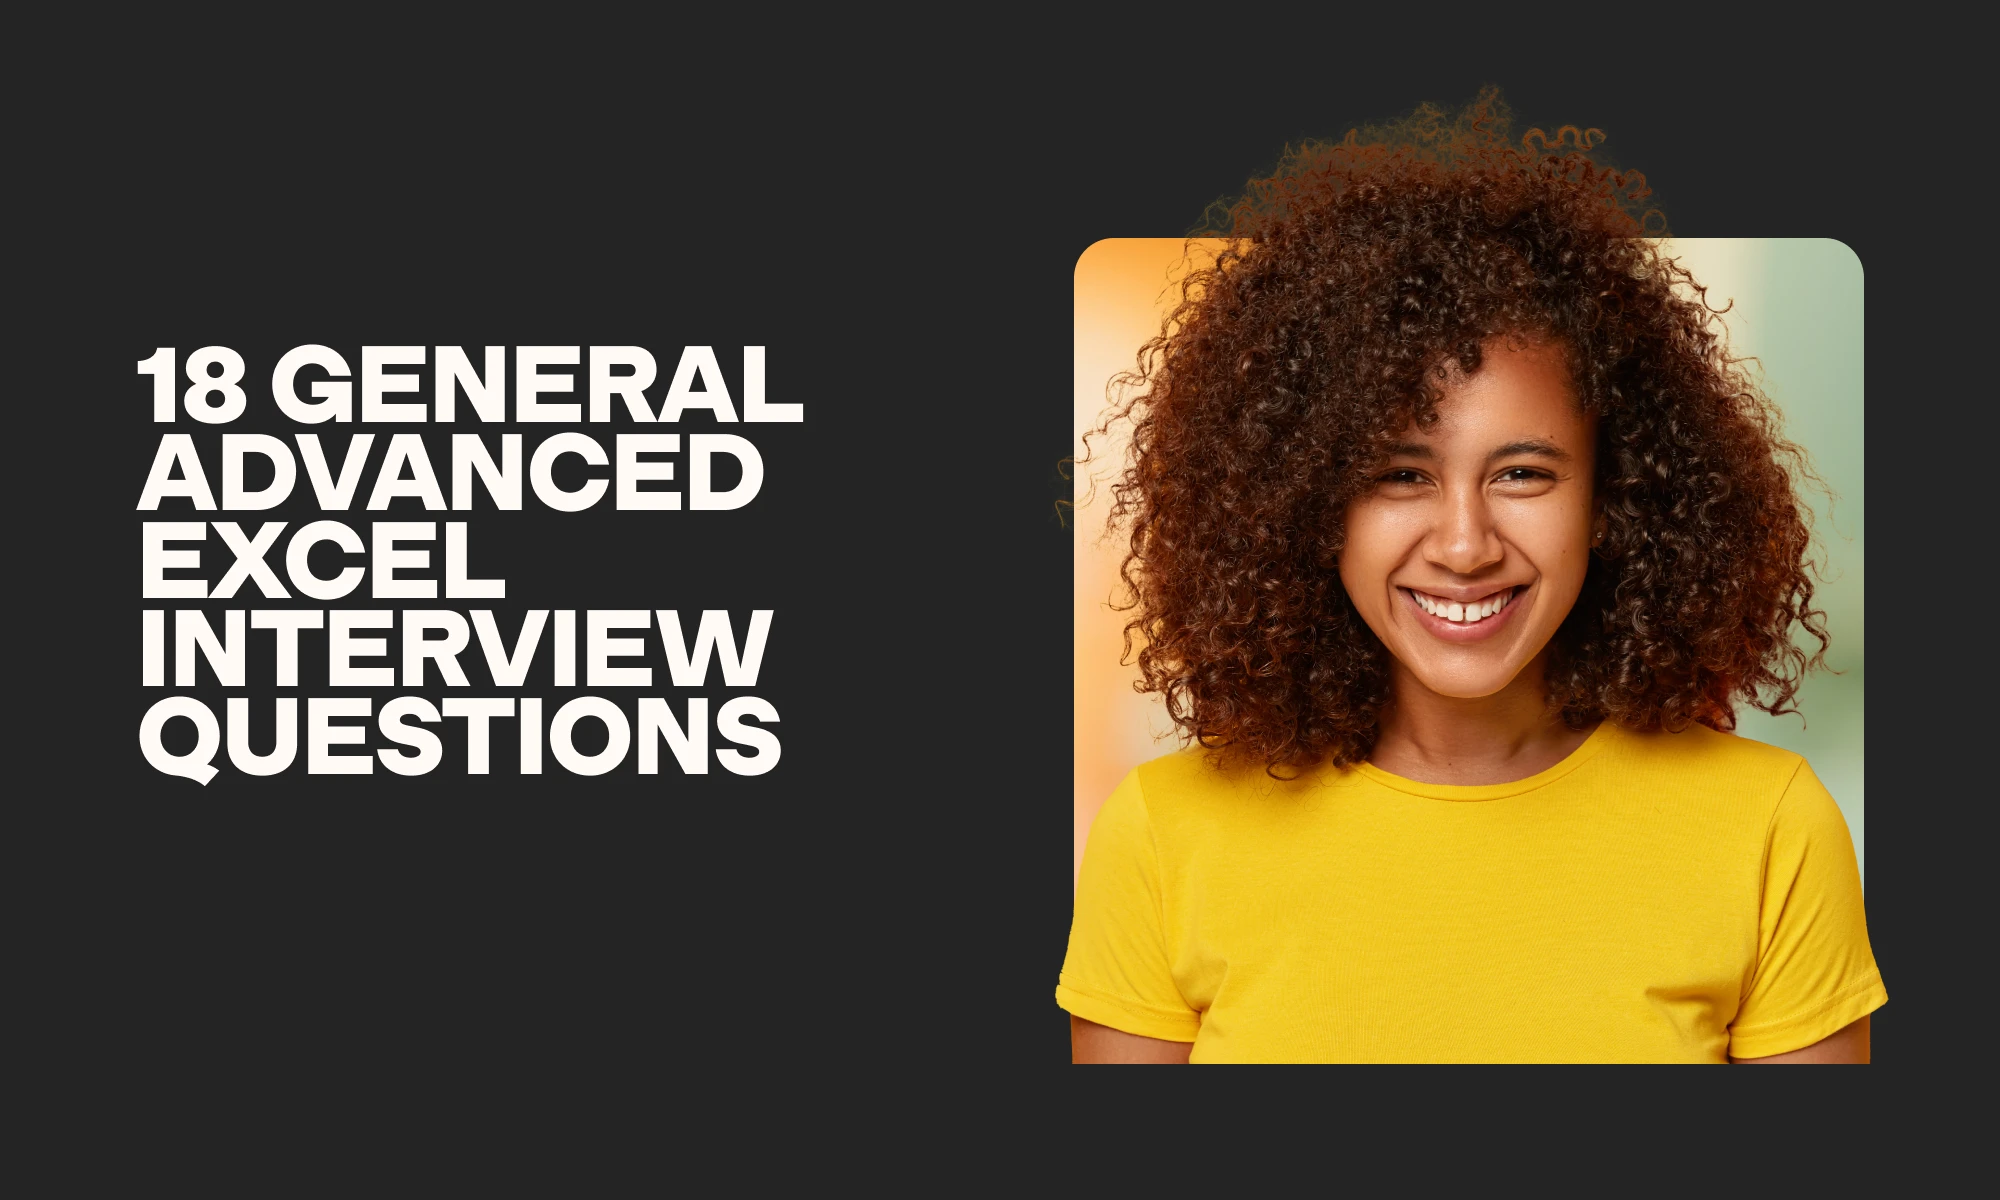 image showing general advanced Excel interview questions